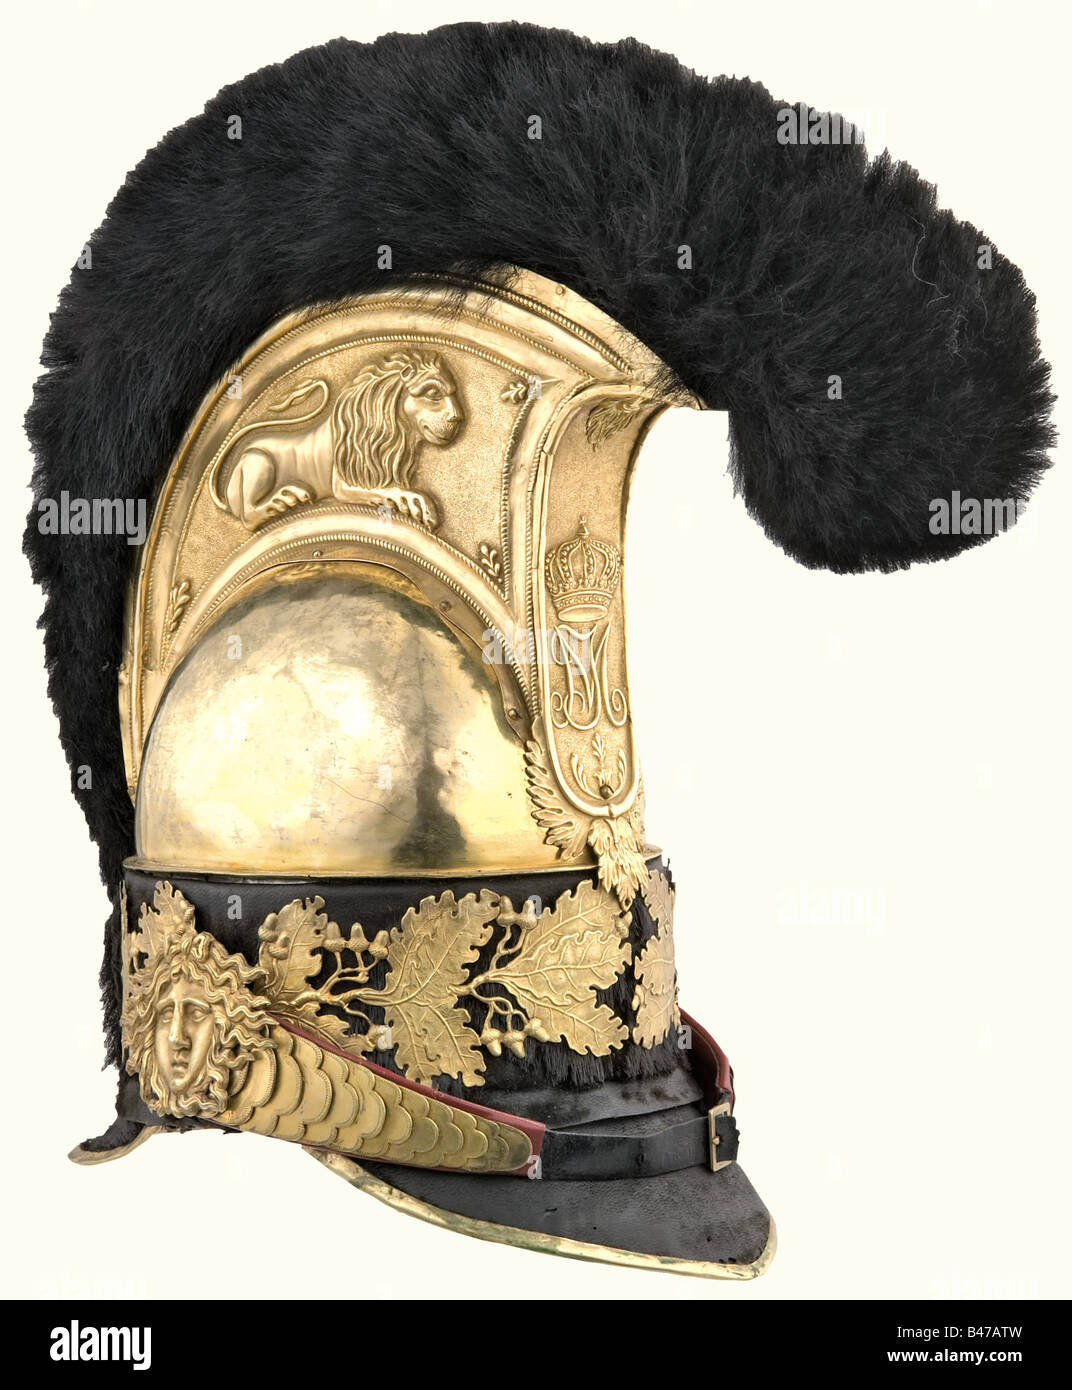 An officer's helmet, 1814 - 1825, Bavaria, Garde du Corps Regiment Fire-gilded brass skull and finely shaped comb with a recumbent lion. Band and brim are covered with sealskin and gilded oak leaves. Silver-plated cockade. Original bearskin chenille, leather lining. Chin straps on Medusa heads. The backing for the metal chinstrap was replaced for the centennial celebration in 1914. The owner's name "Spengel" (Knight of the Military Max-Joseph Order) scratched into the front brim. In 1823, there were only 22 officers in the regiment. As the regiment had only bee, Stock Photo